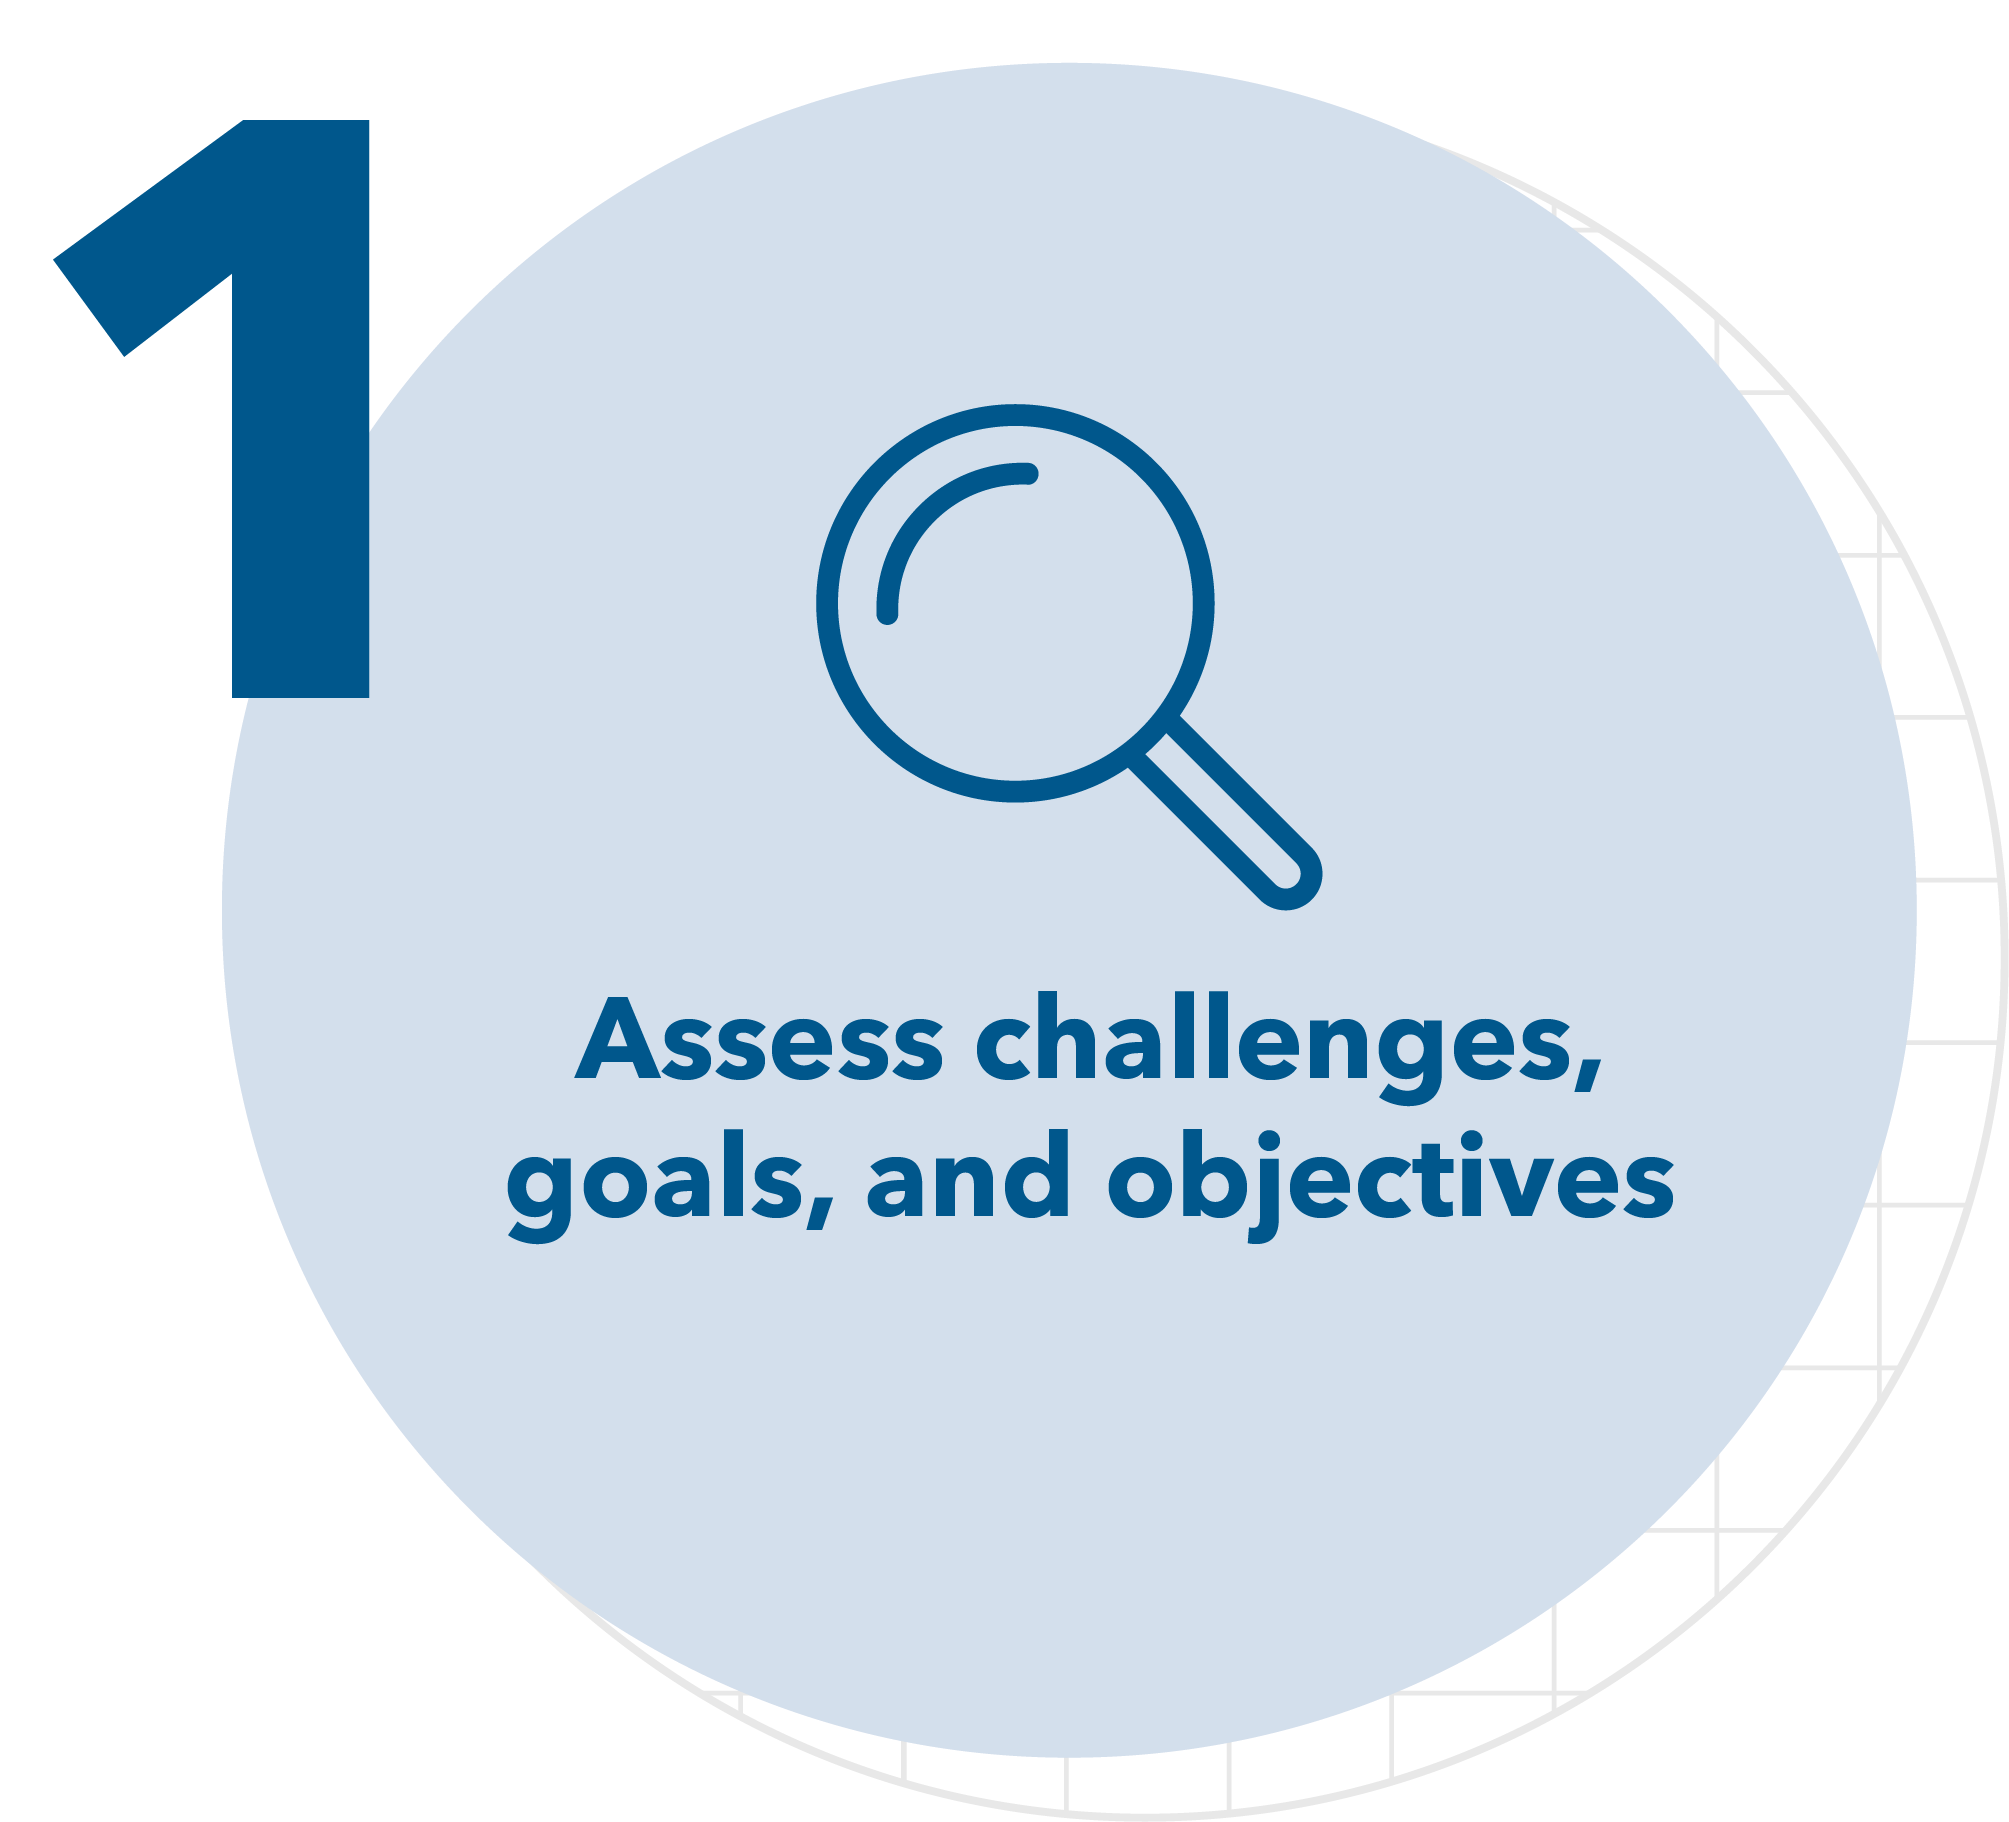 Assess challenges, goals, and objectives